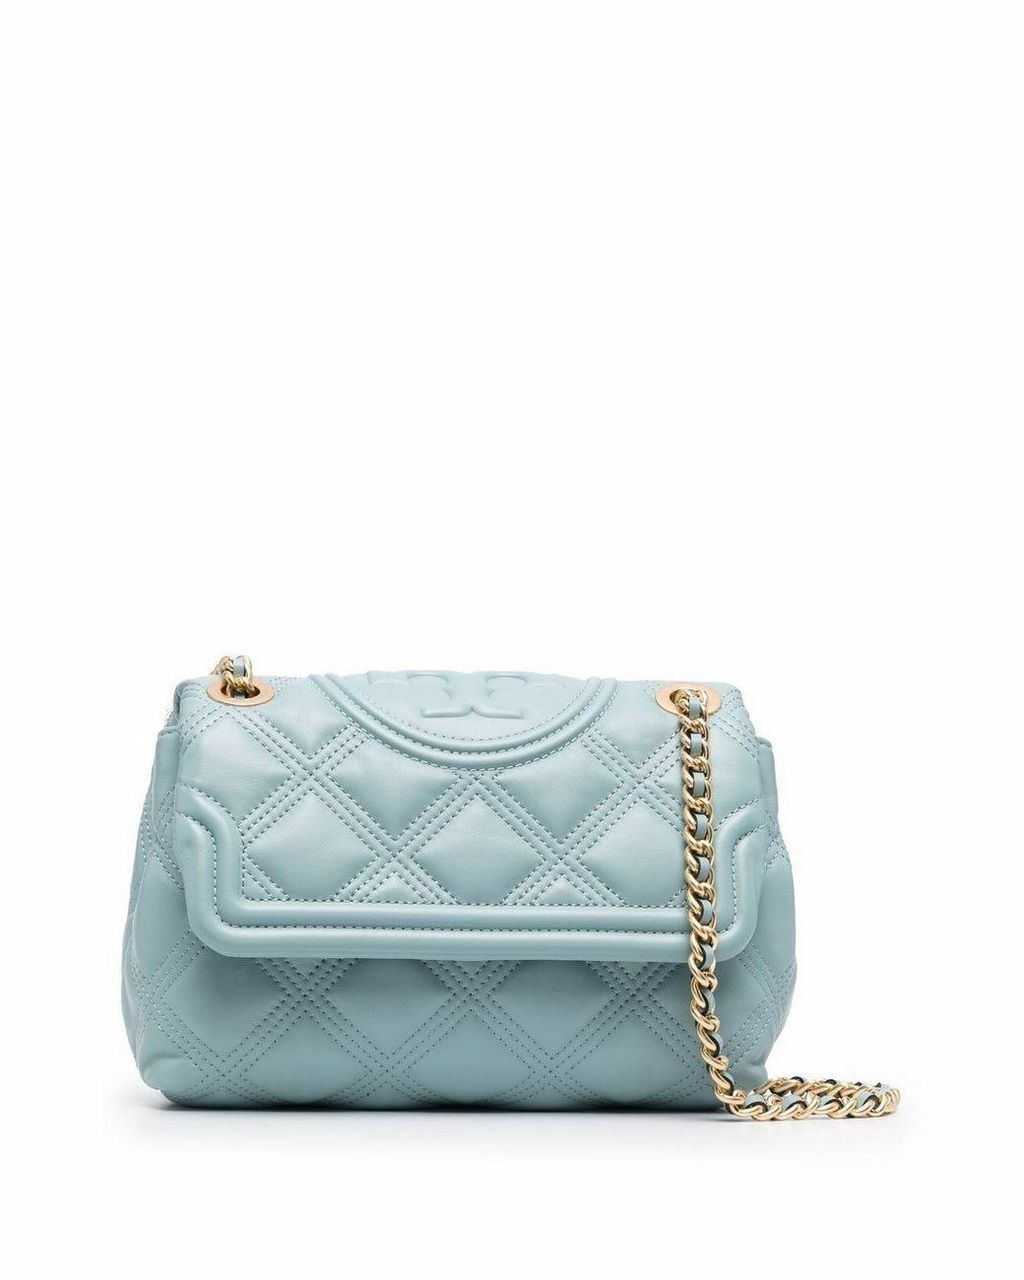 Tory Burch Fleming Soft Convertible Leather Shoulder Bag in Blue